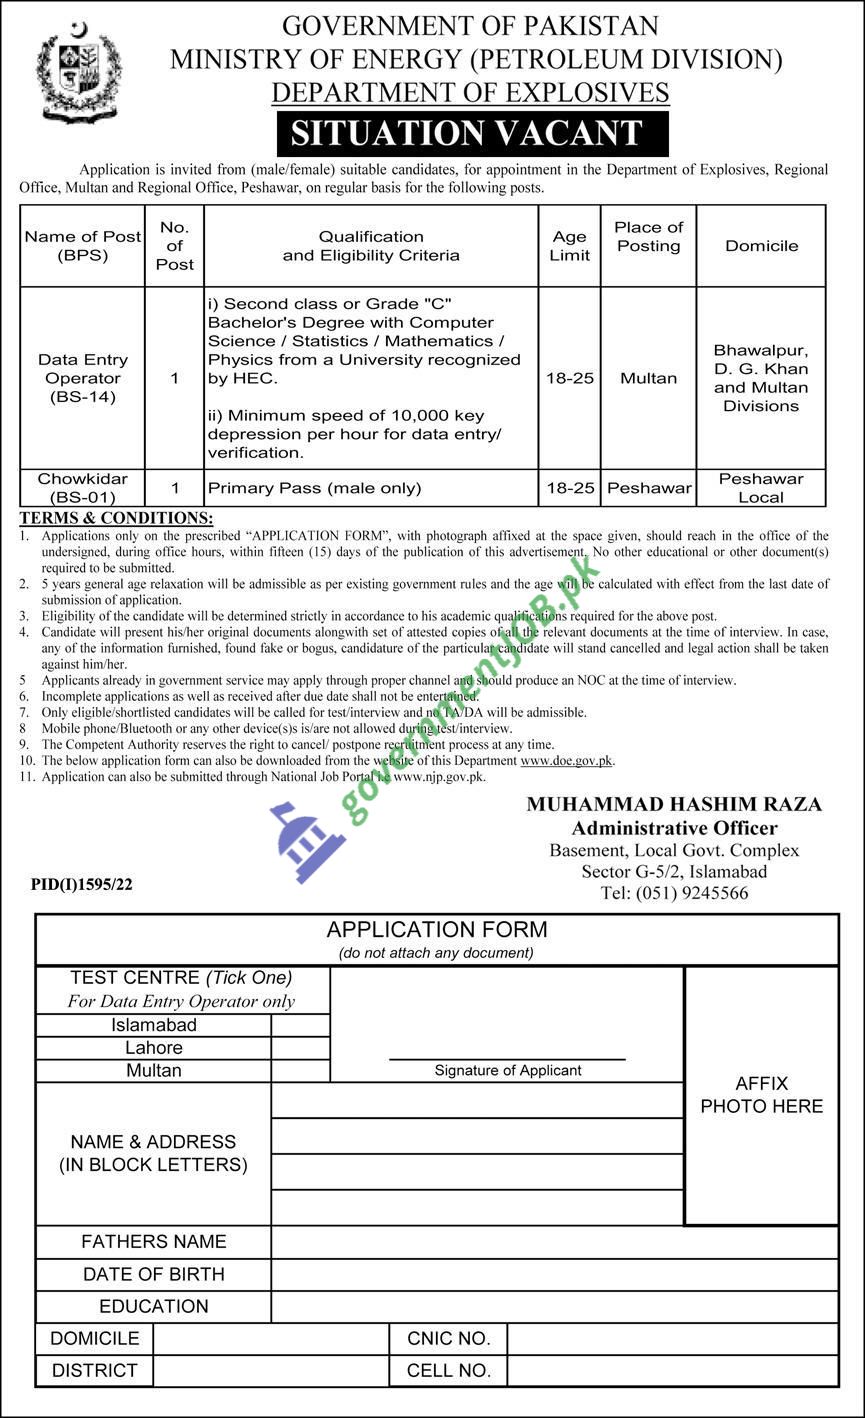 Ministry of Energy (Petroleum Division) Jobs 2022